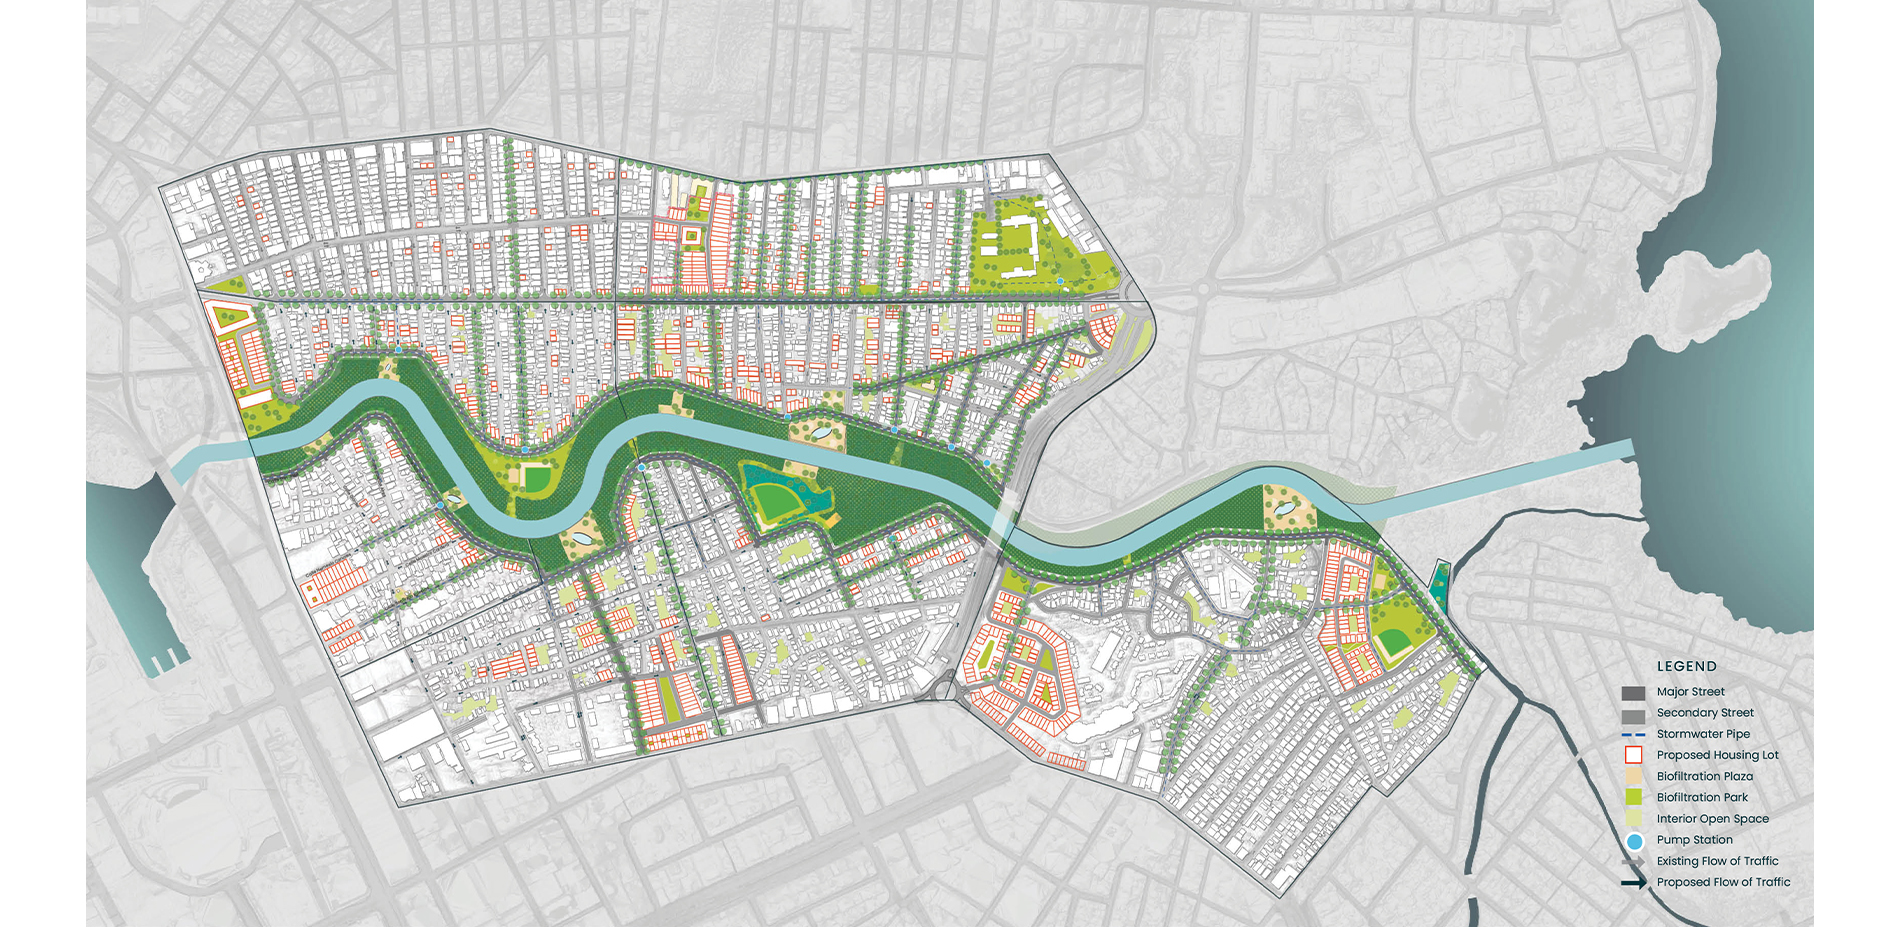 The Comprehensive Infrastructure Master Plan for the Caño Martín Peña District